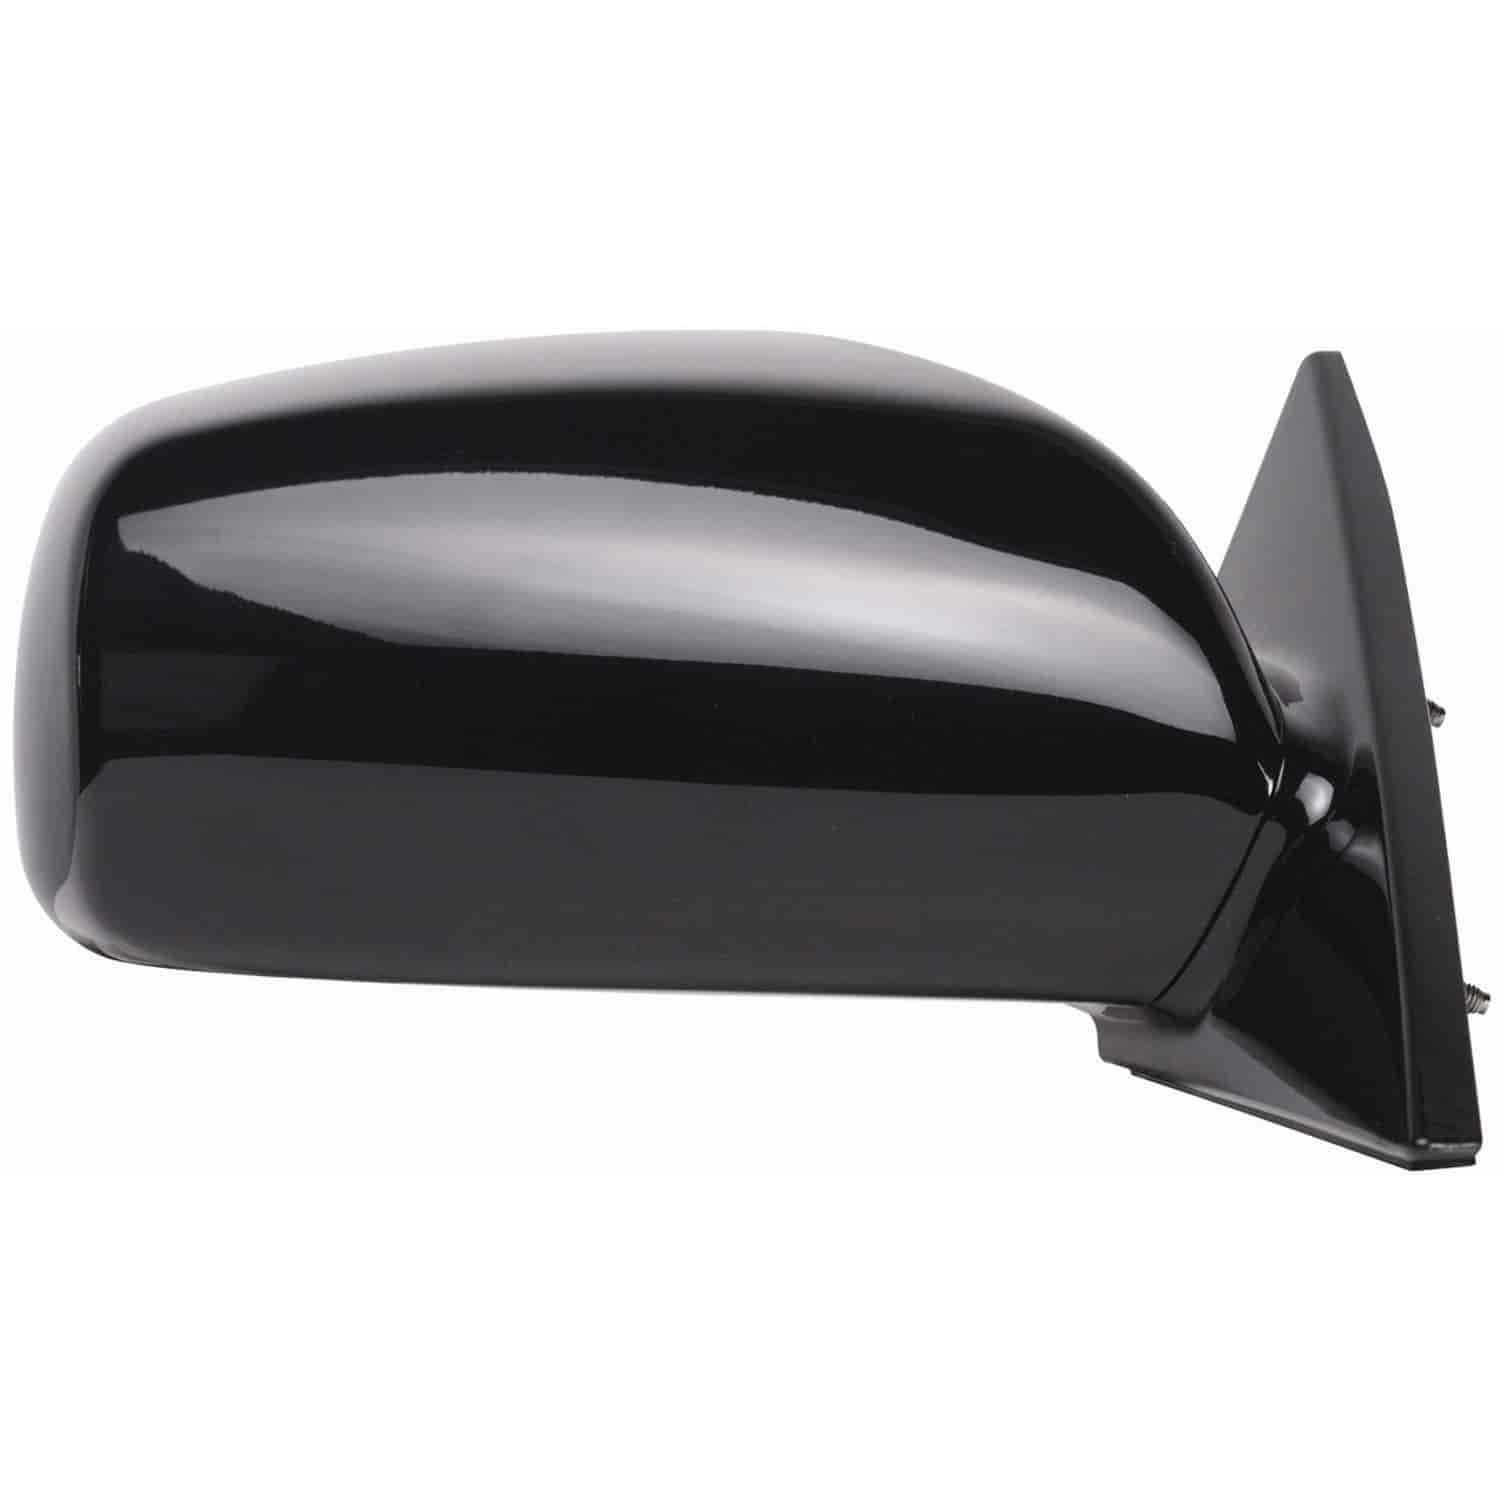 OEM Style Replacement mirror for 04-08 Toyota Solara Coupe/Convertible passenger side mirror tested